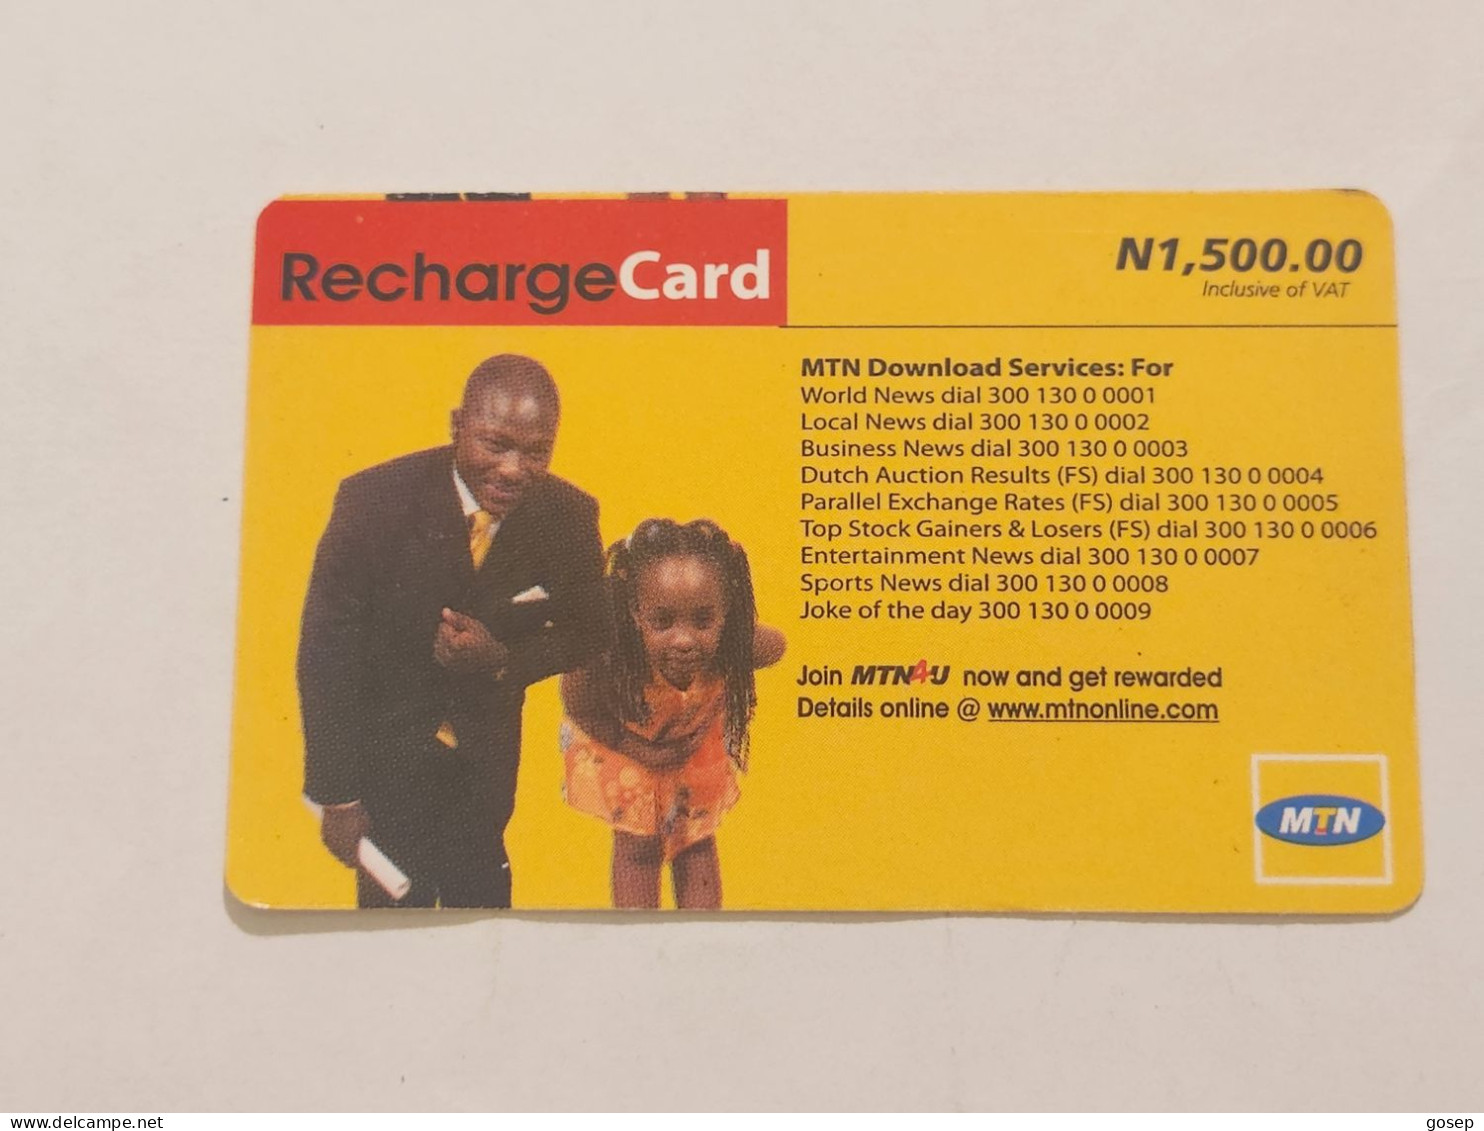 NIGERIA(NG-MTN-REF-0017E)-Father And Daughter-(73)-(7314-2106-4926)-(N1.500.00)-used Card - Nigeria